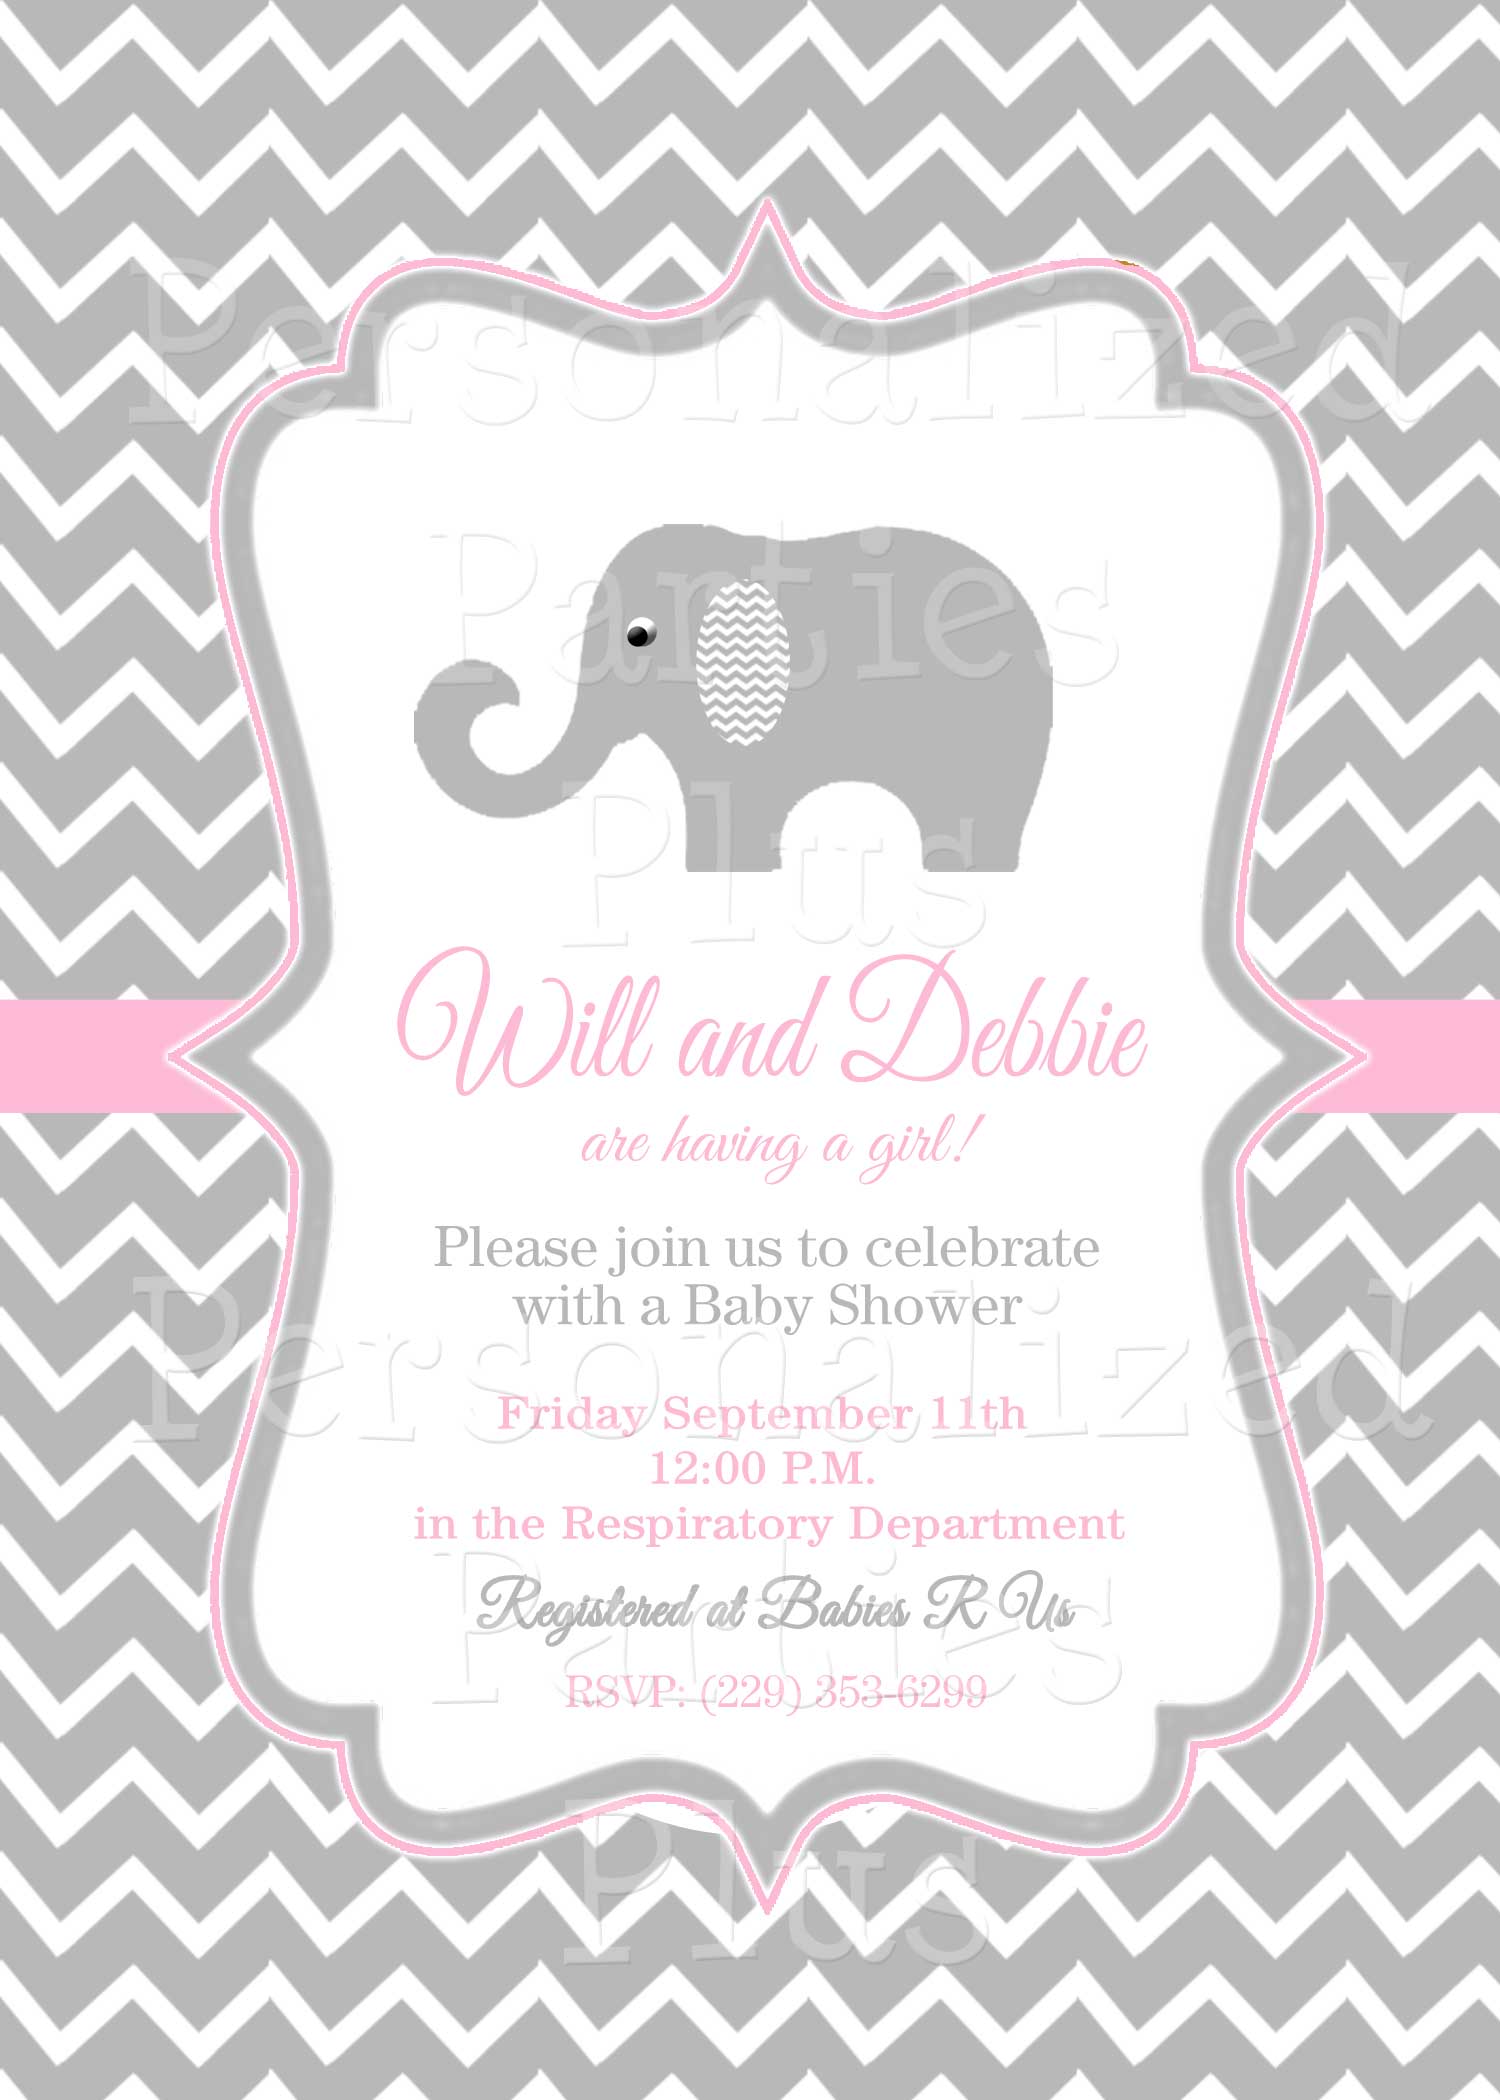 Full Size of Baby Shower:inspirational Elephant Baby Shower Invitations Photo Concepts Baby Shower Party Favors Baby Shower Tea Baby Shower Templates Indian Baby Shower